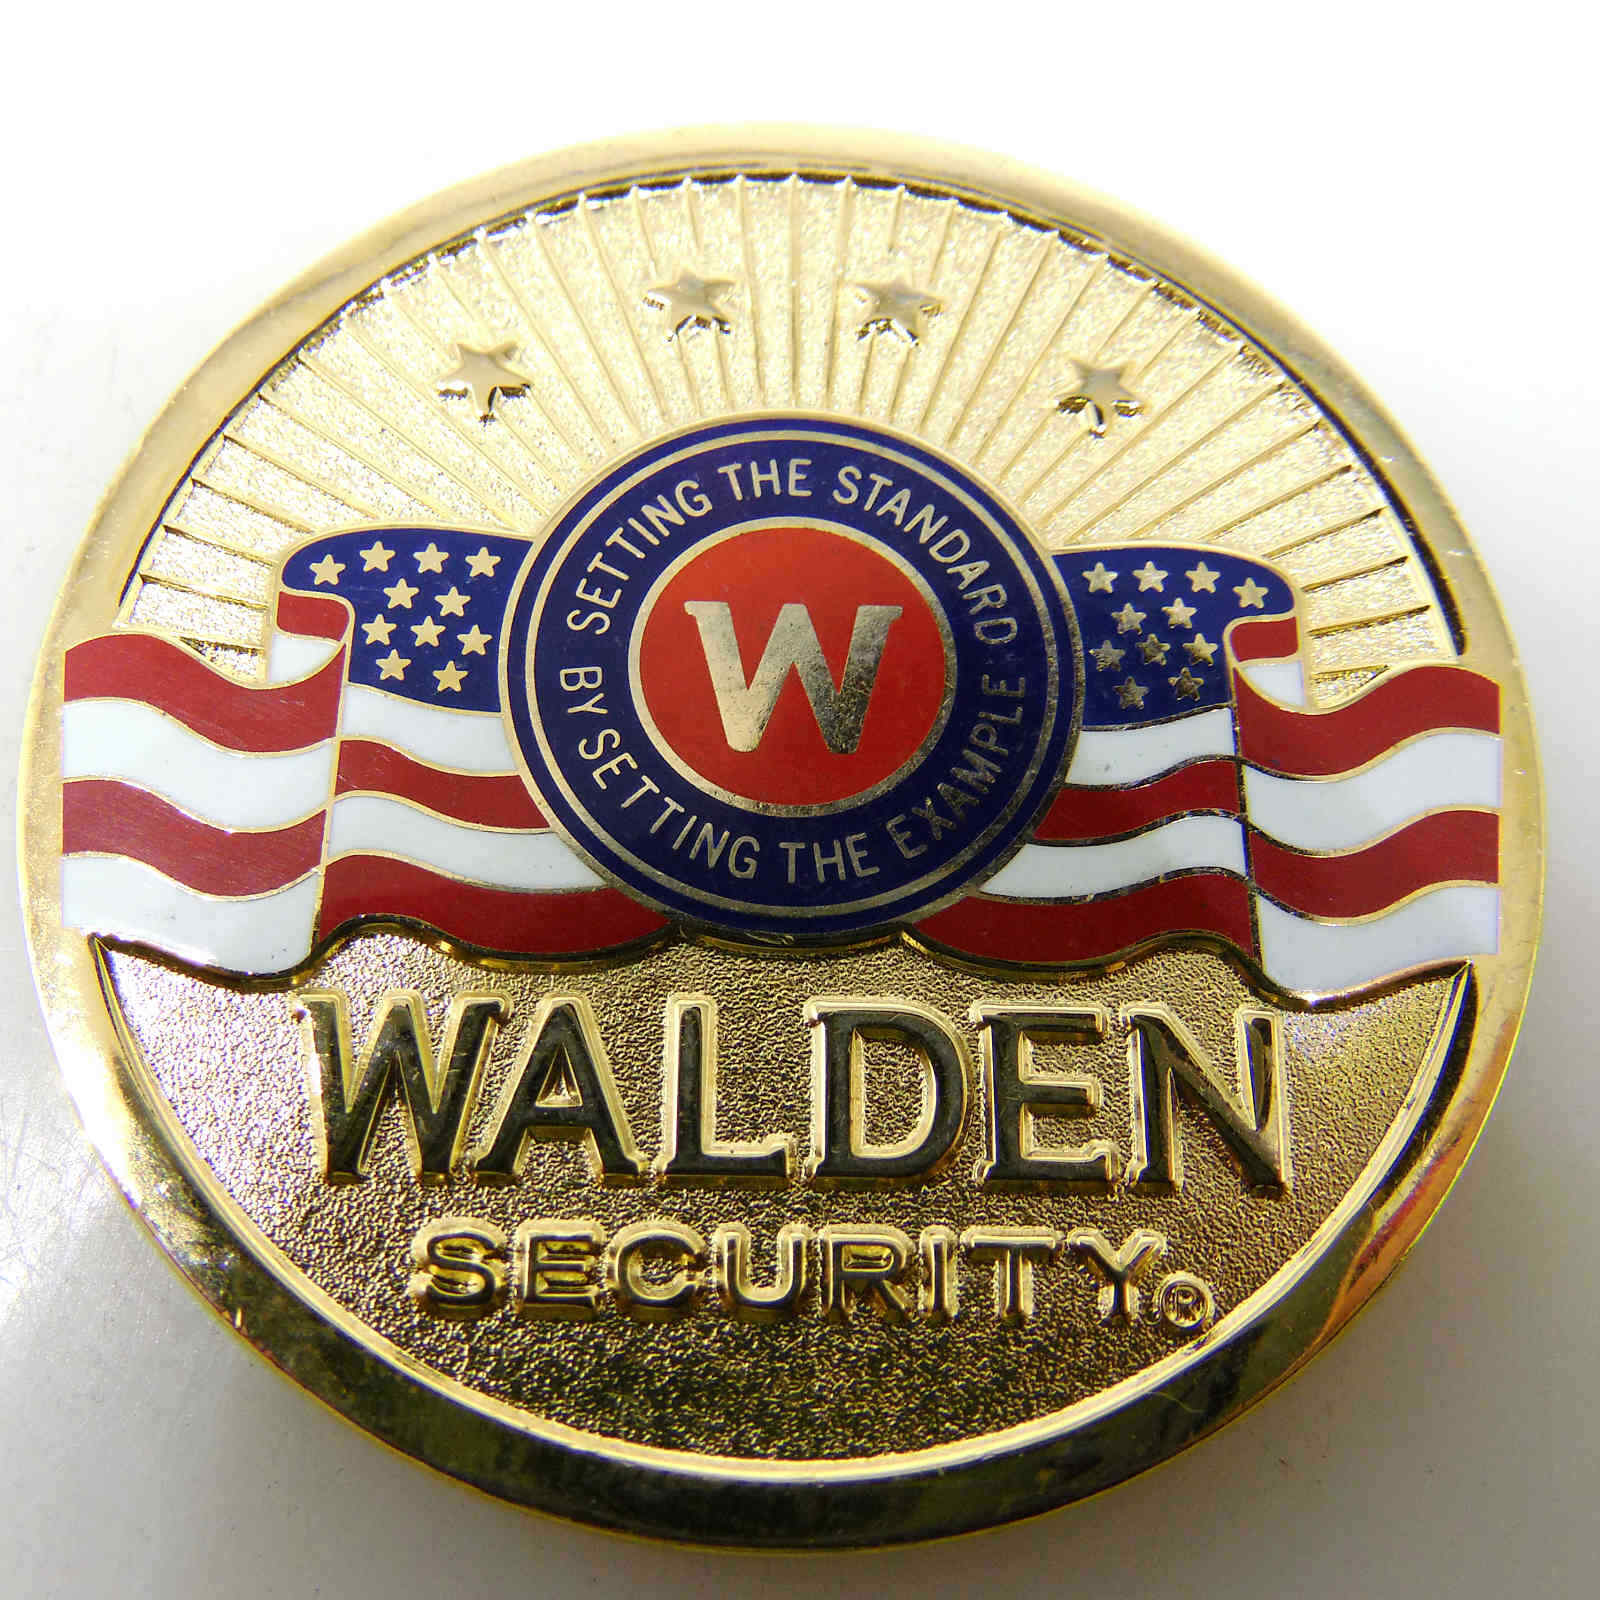 SETTING THE STANDARD WALDEN CHALLENGE COIN